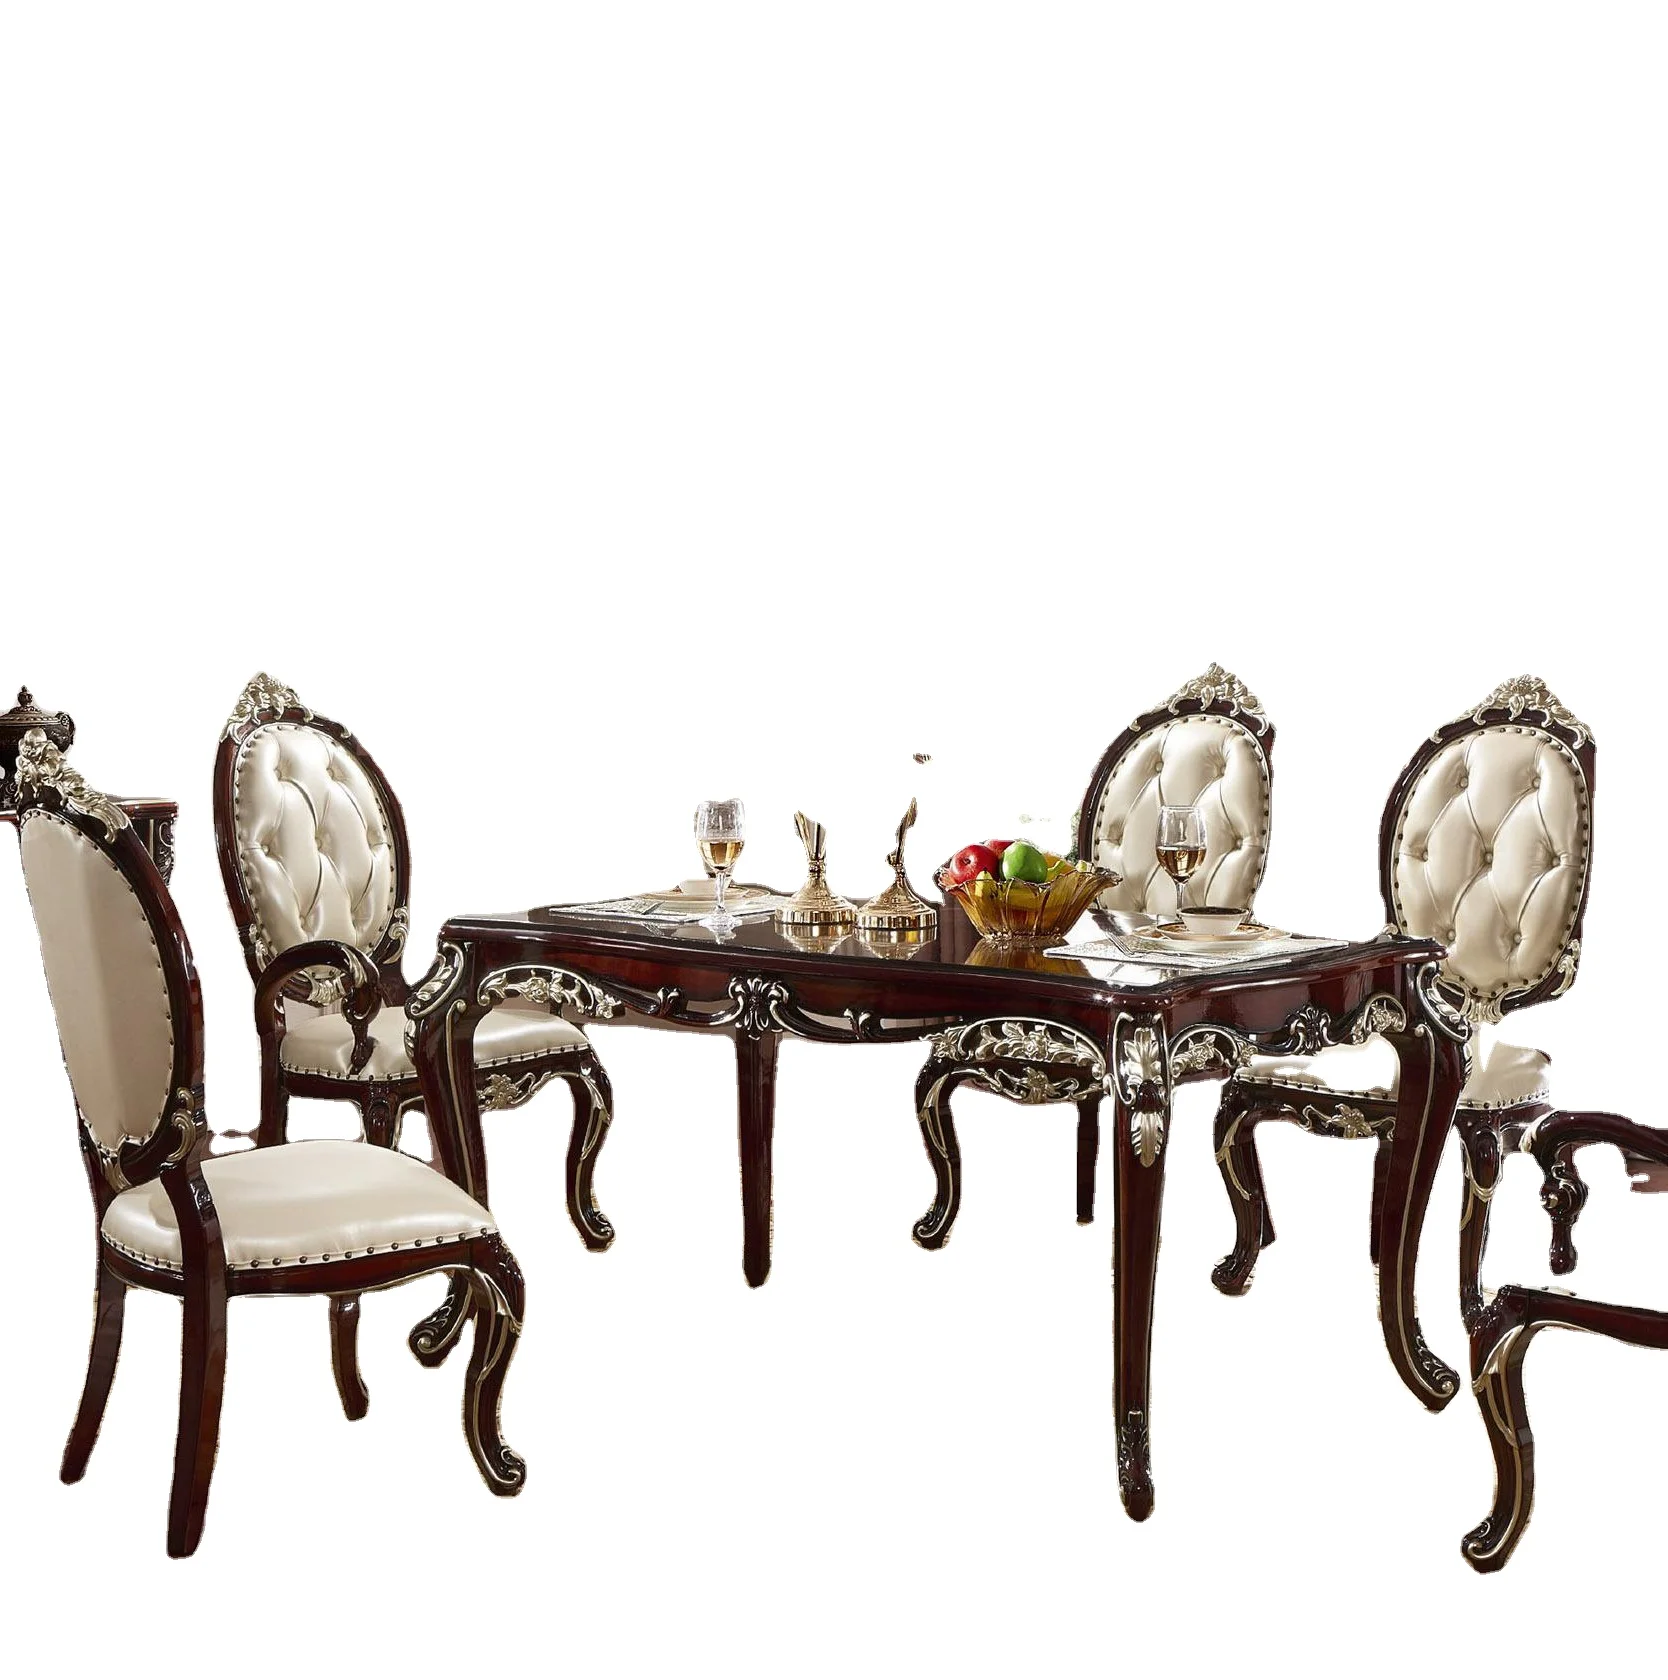 classical dinning table set dining room furniture European luxury dining table set with 6 chairs